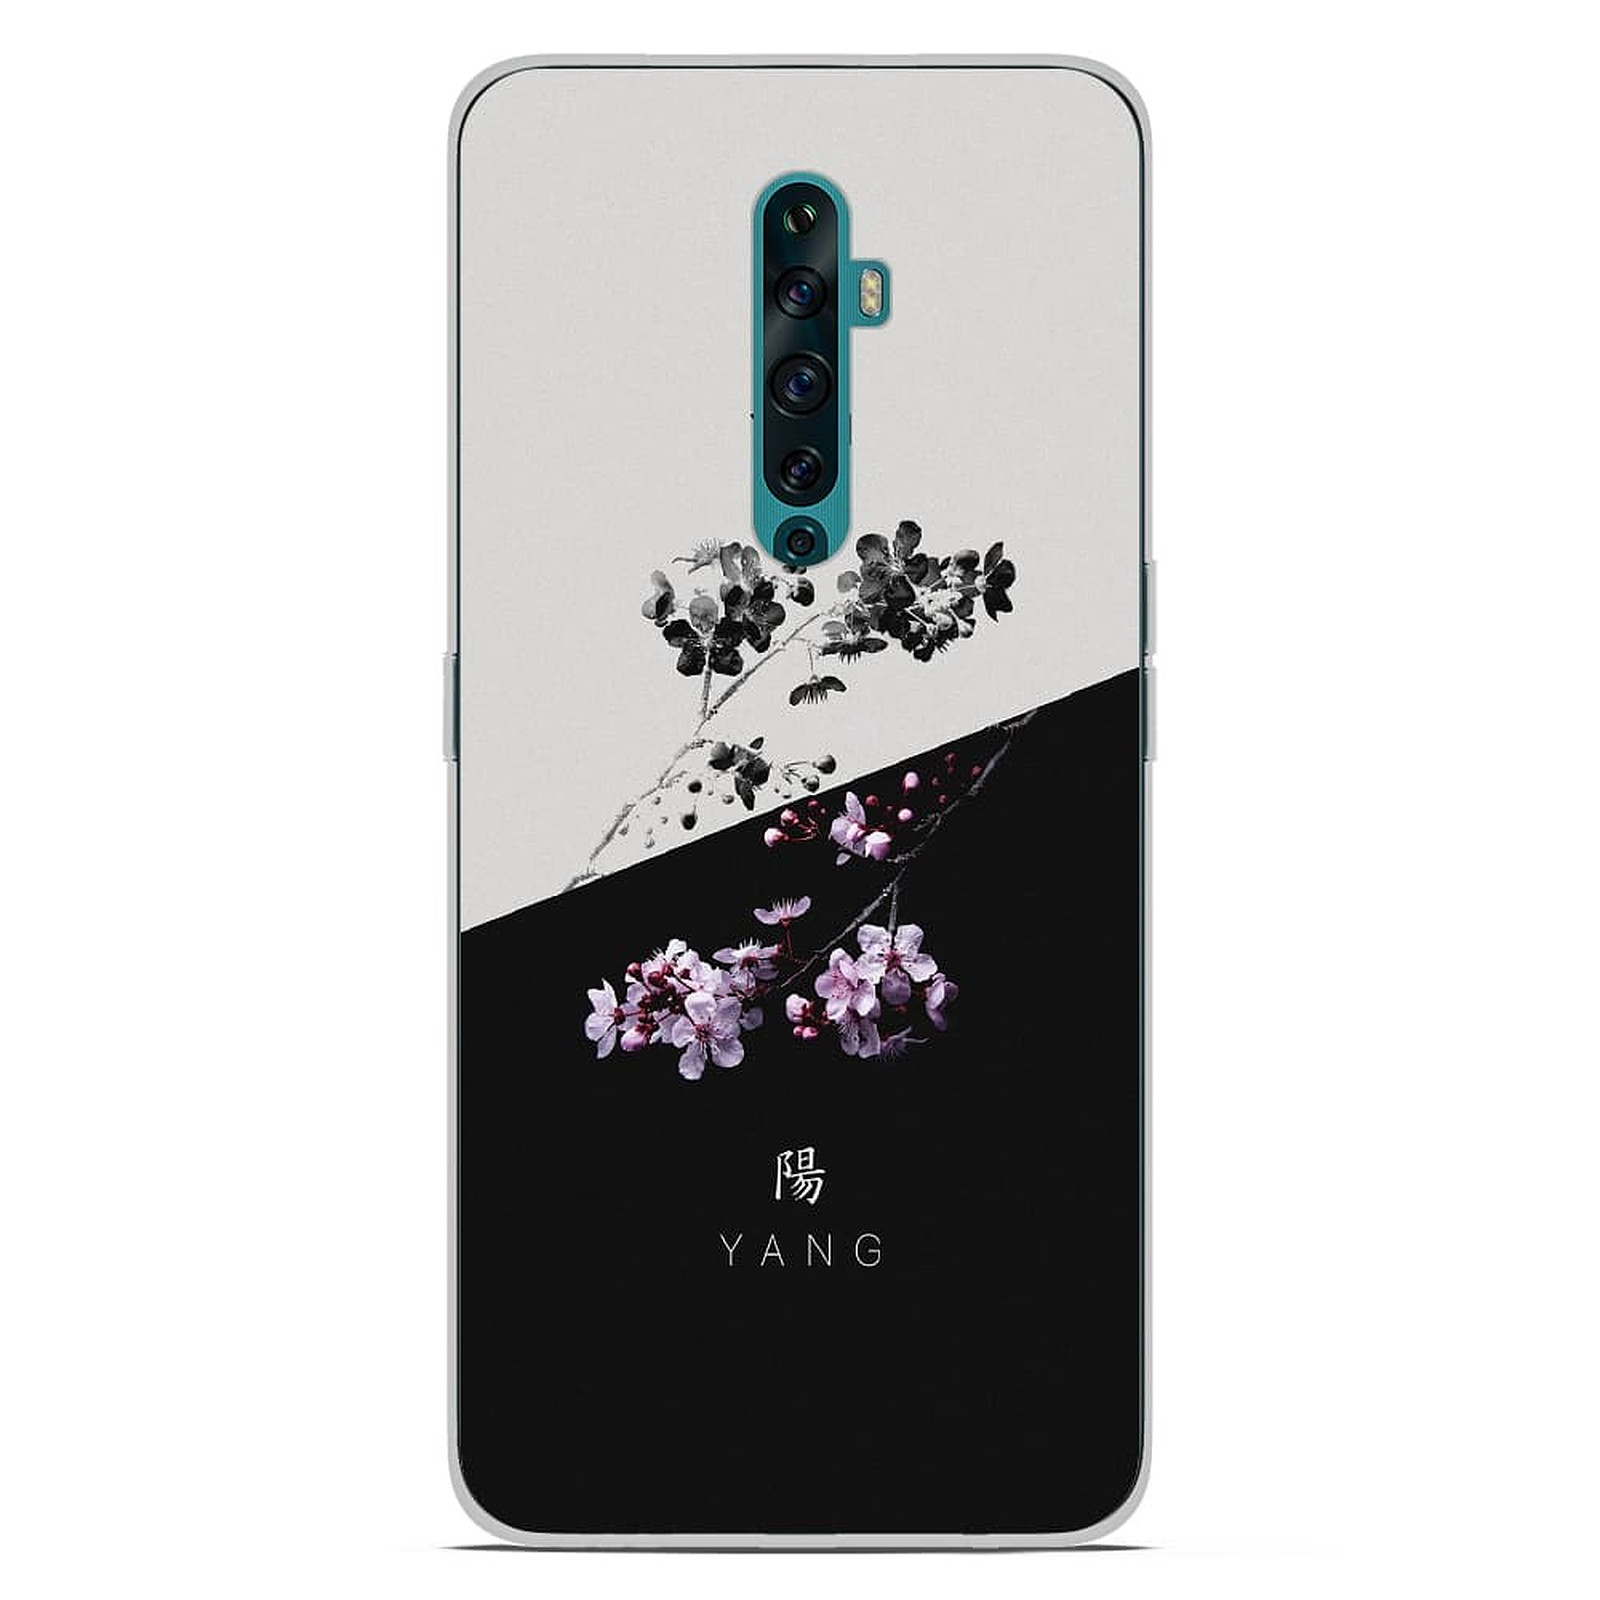 1001 Coques Coque silicone gel Oppo Reno 2Z motif Yin et Yang - Coque telephone 1001Coques